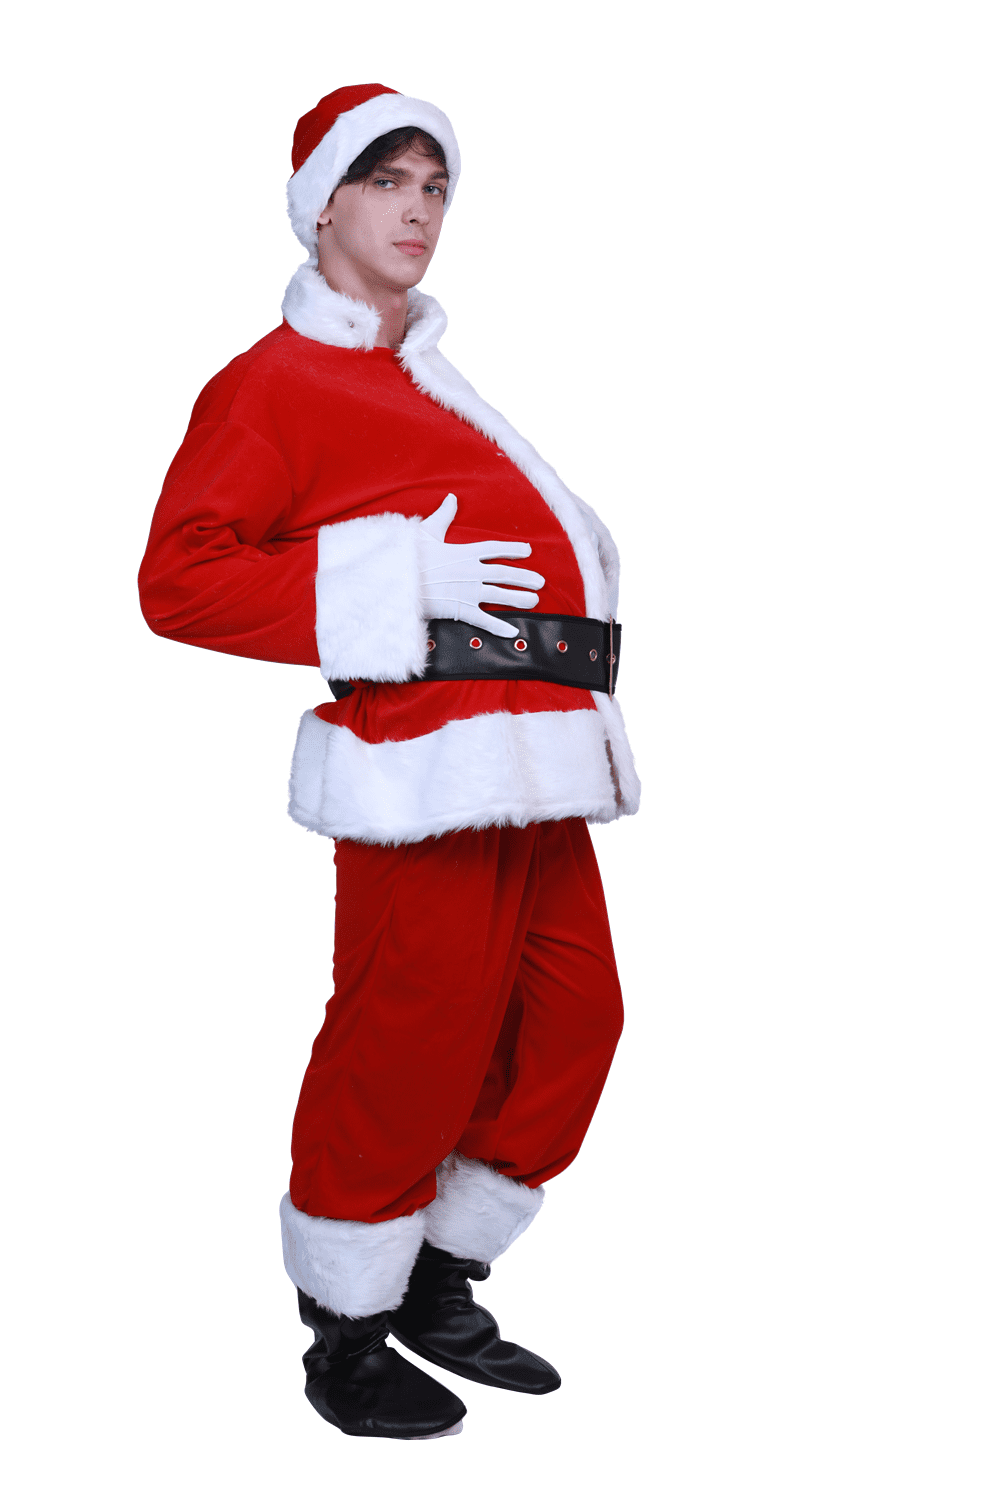 EraSpooky Santa Belly Accessory Fake Padded Belly Red